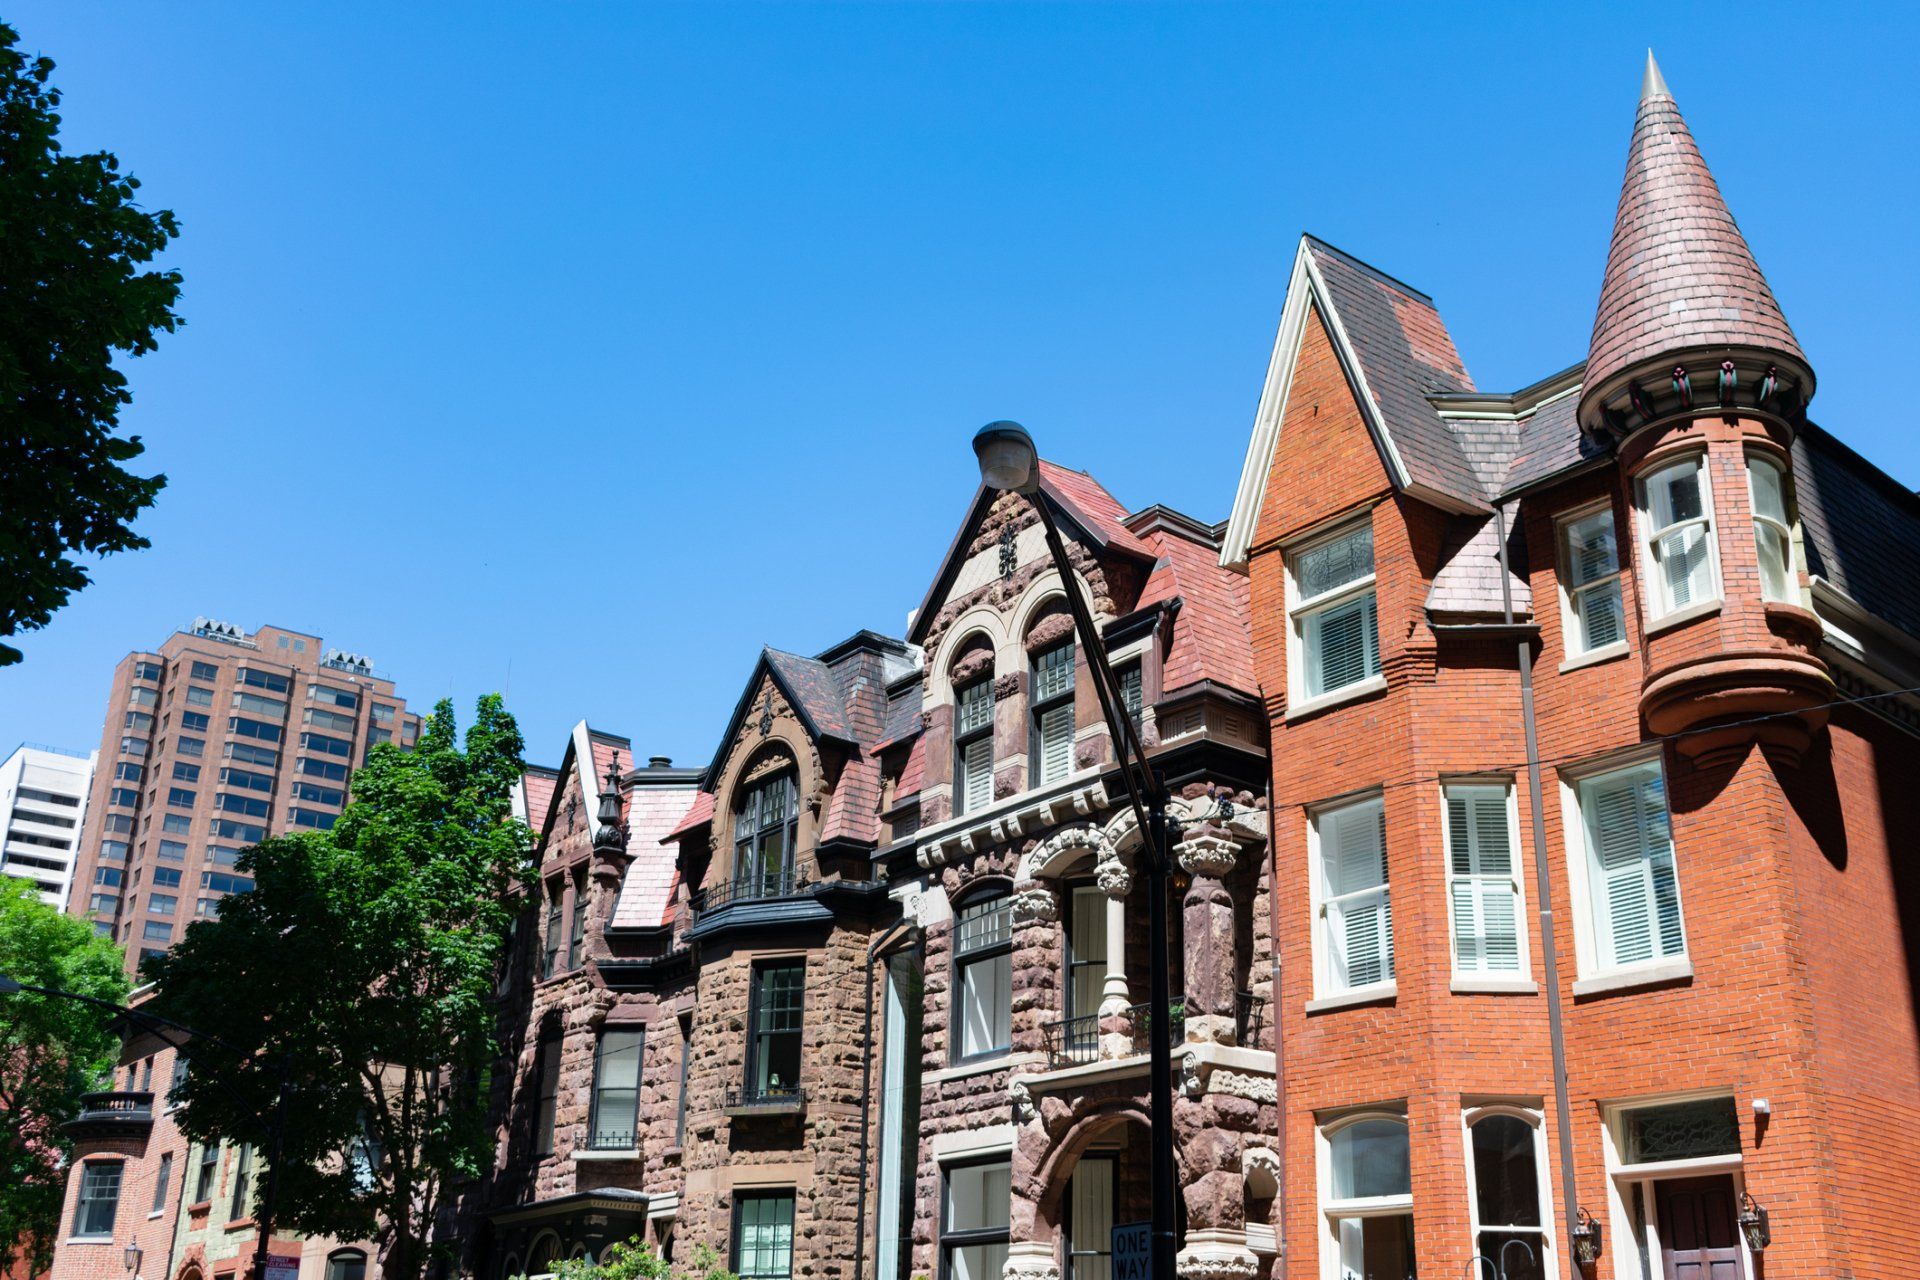 A row of brick houses with a tower in the middle